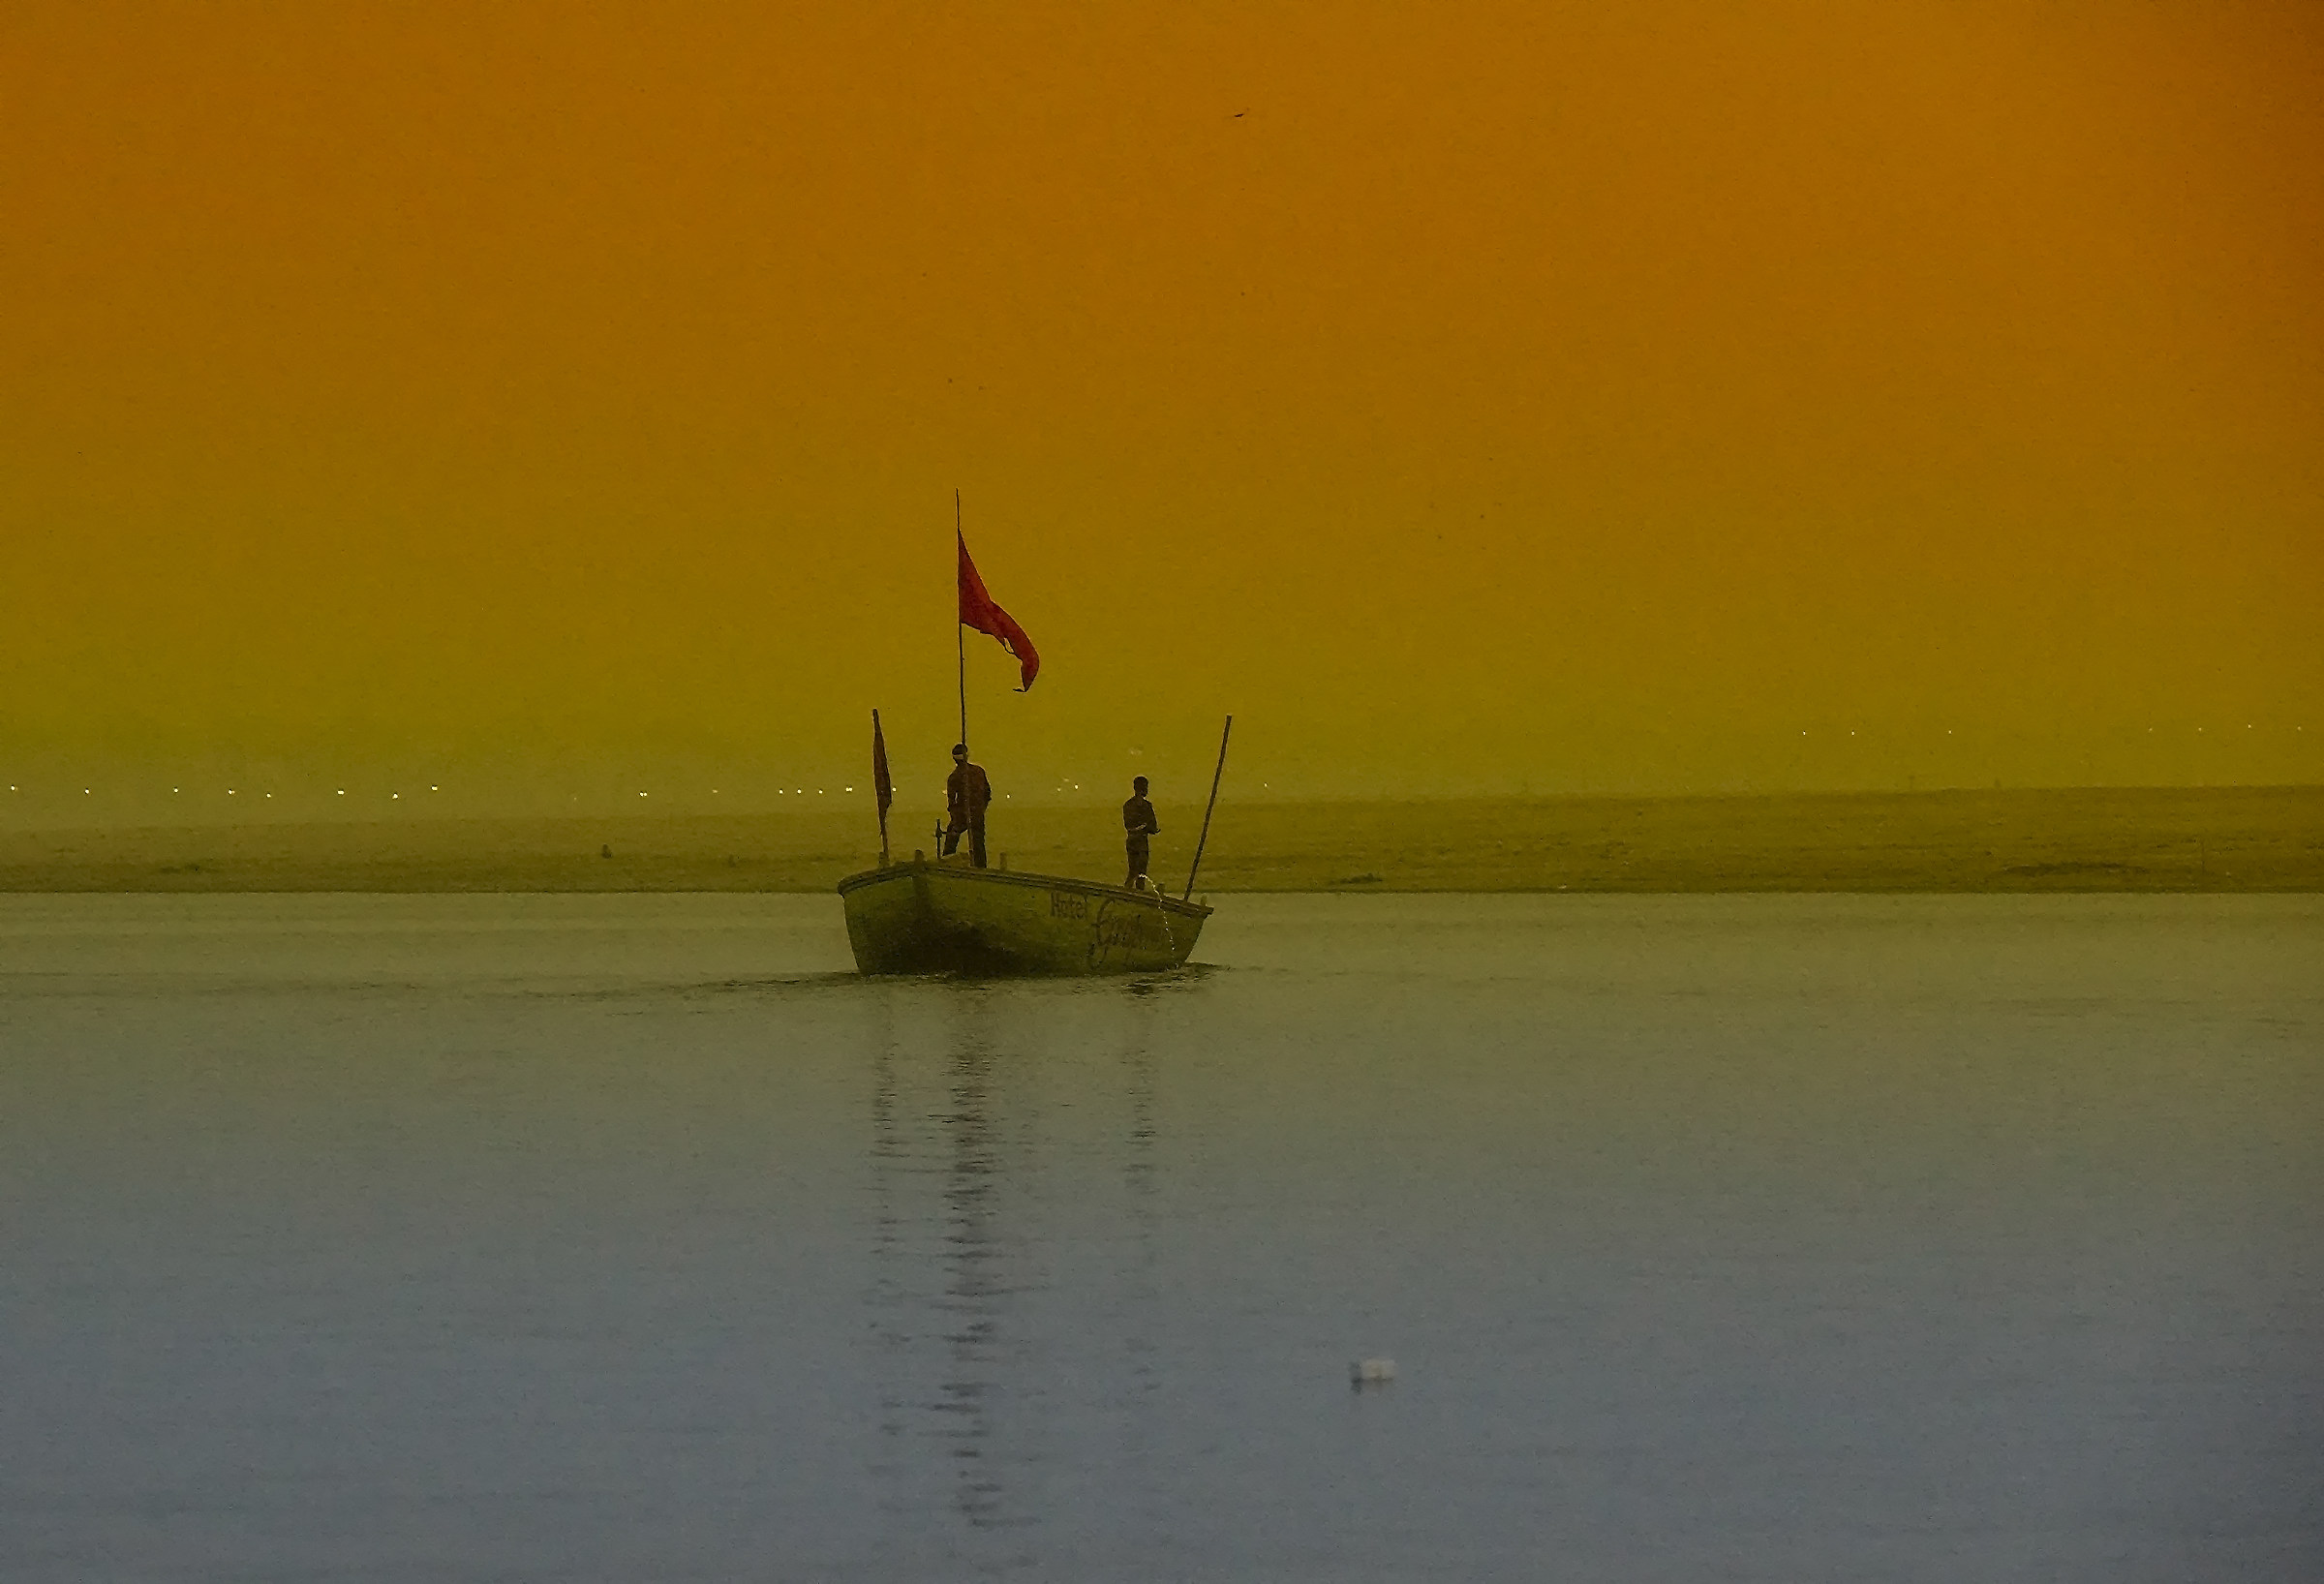  Sailing on the Ganges-INDIA-...